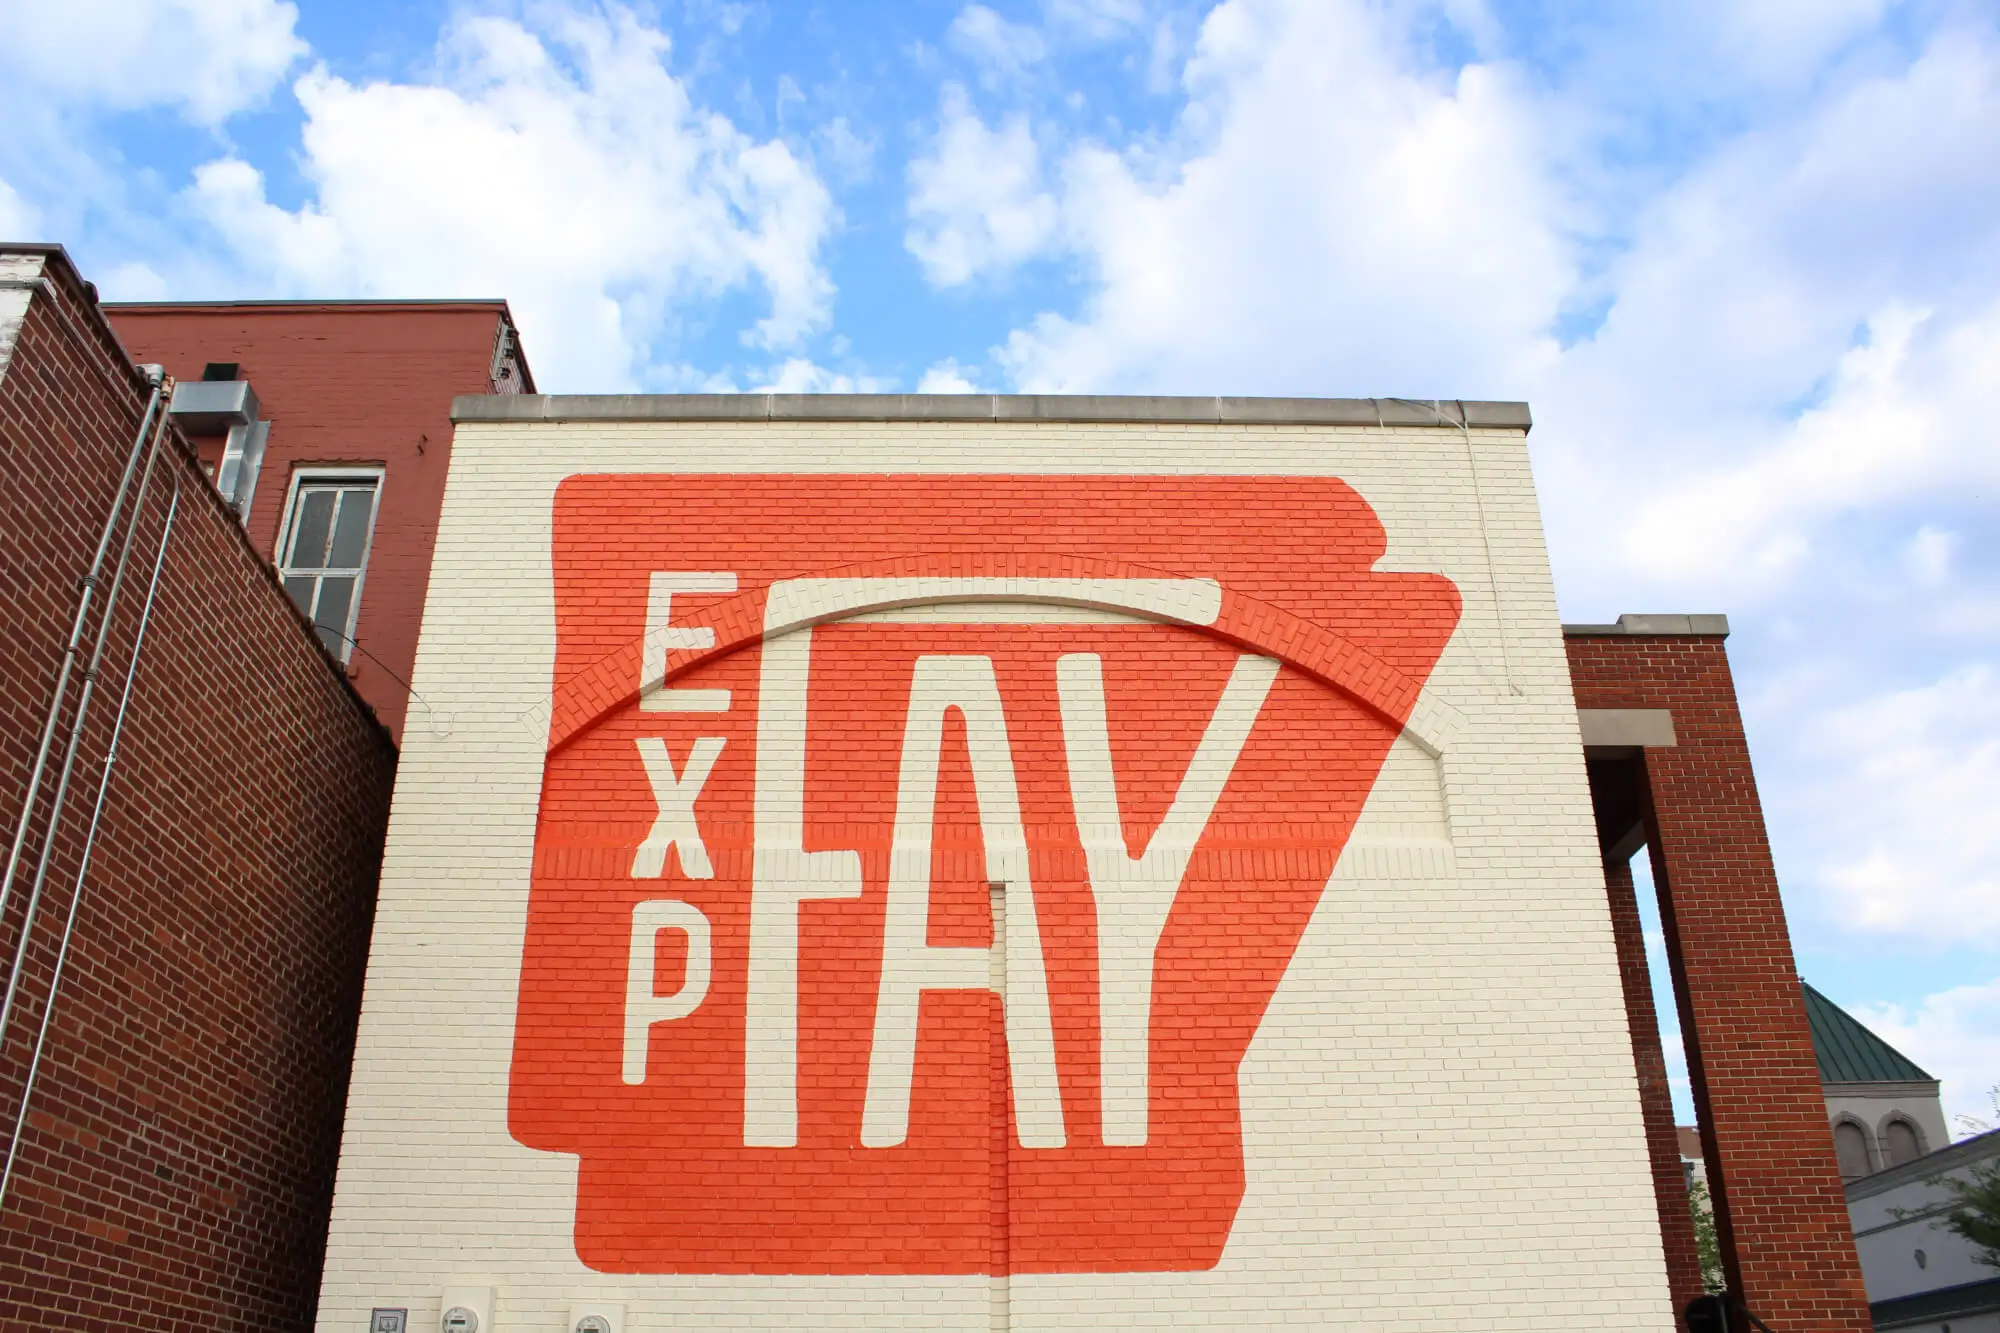 Experience Fayetteville mural